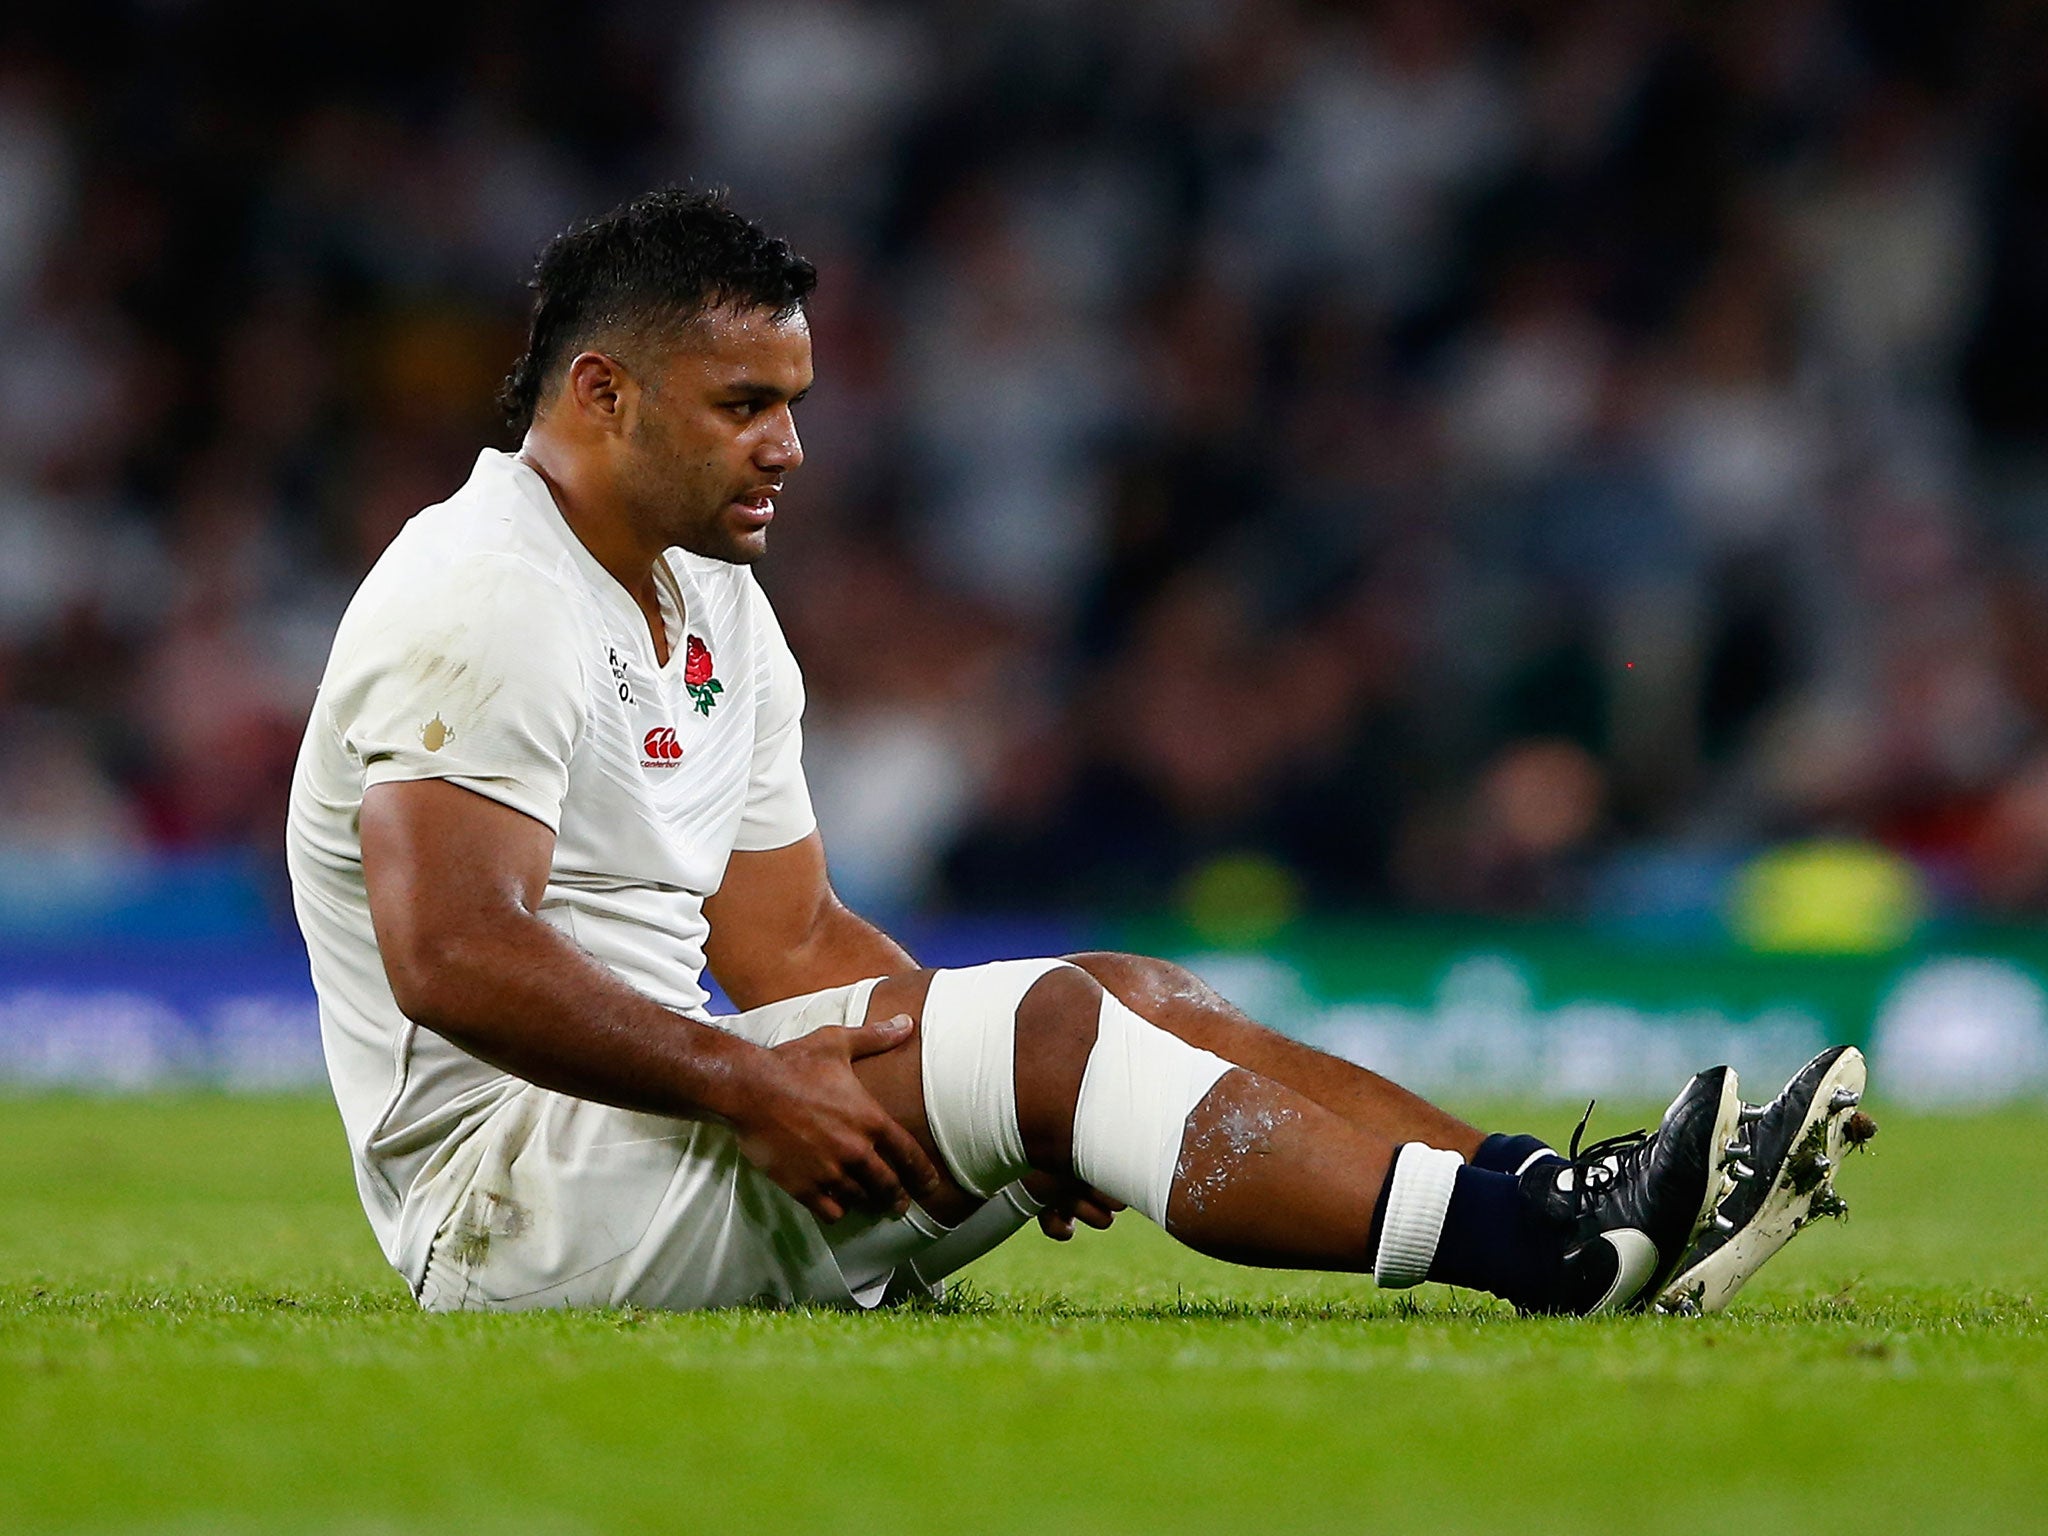 Billy Vunipola has been ruled out of the rest of the World Cup